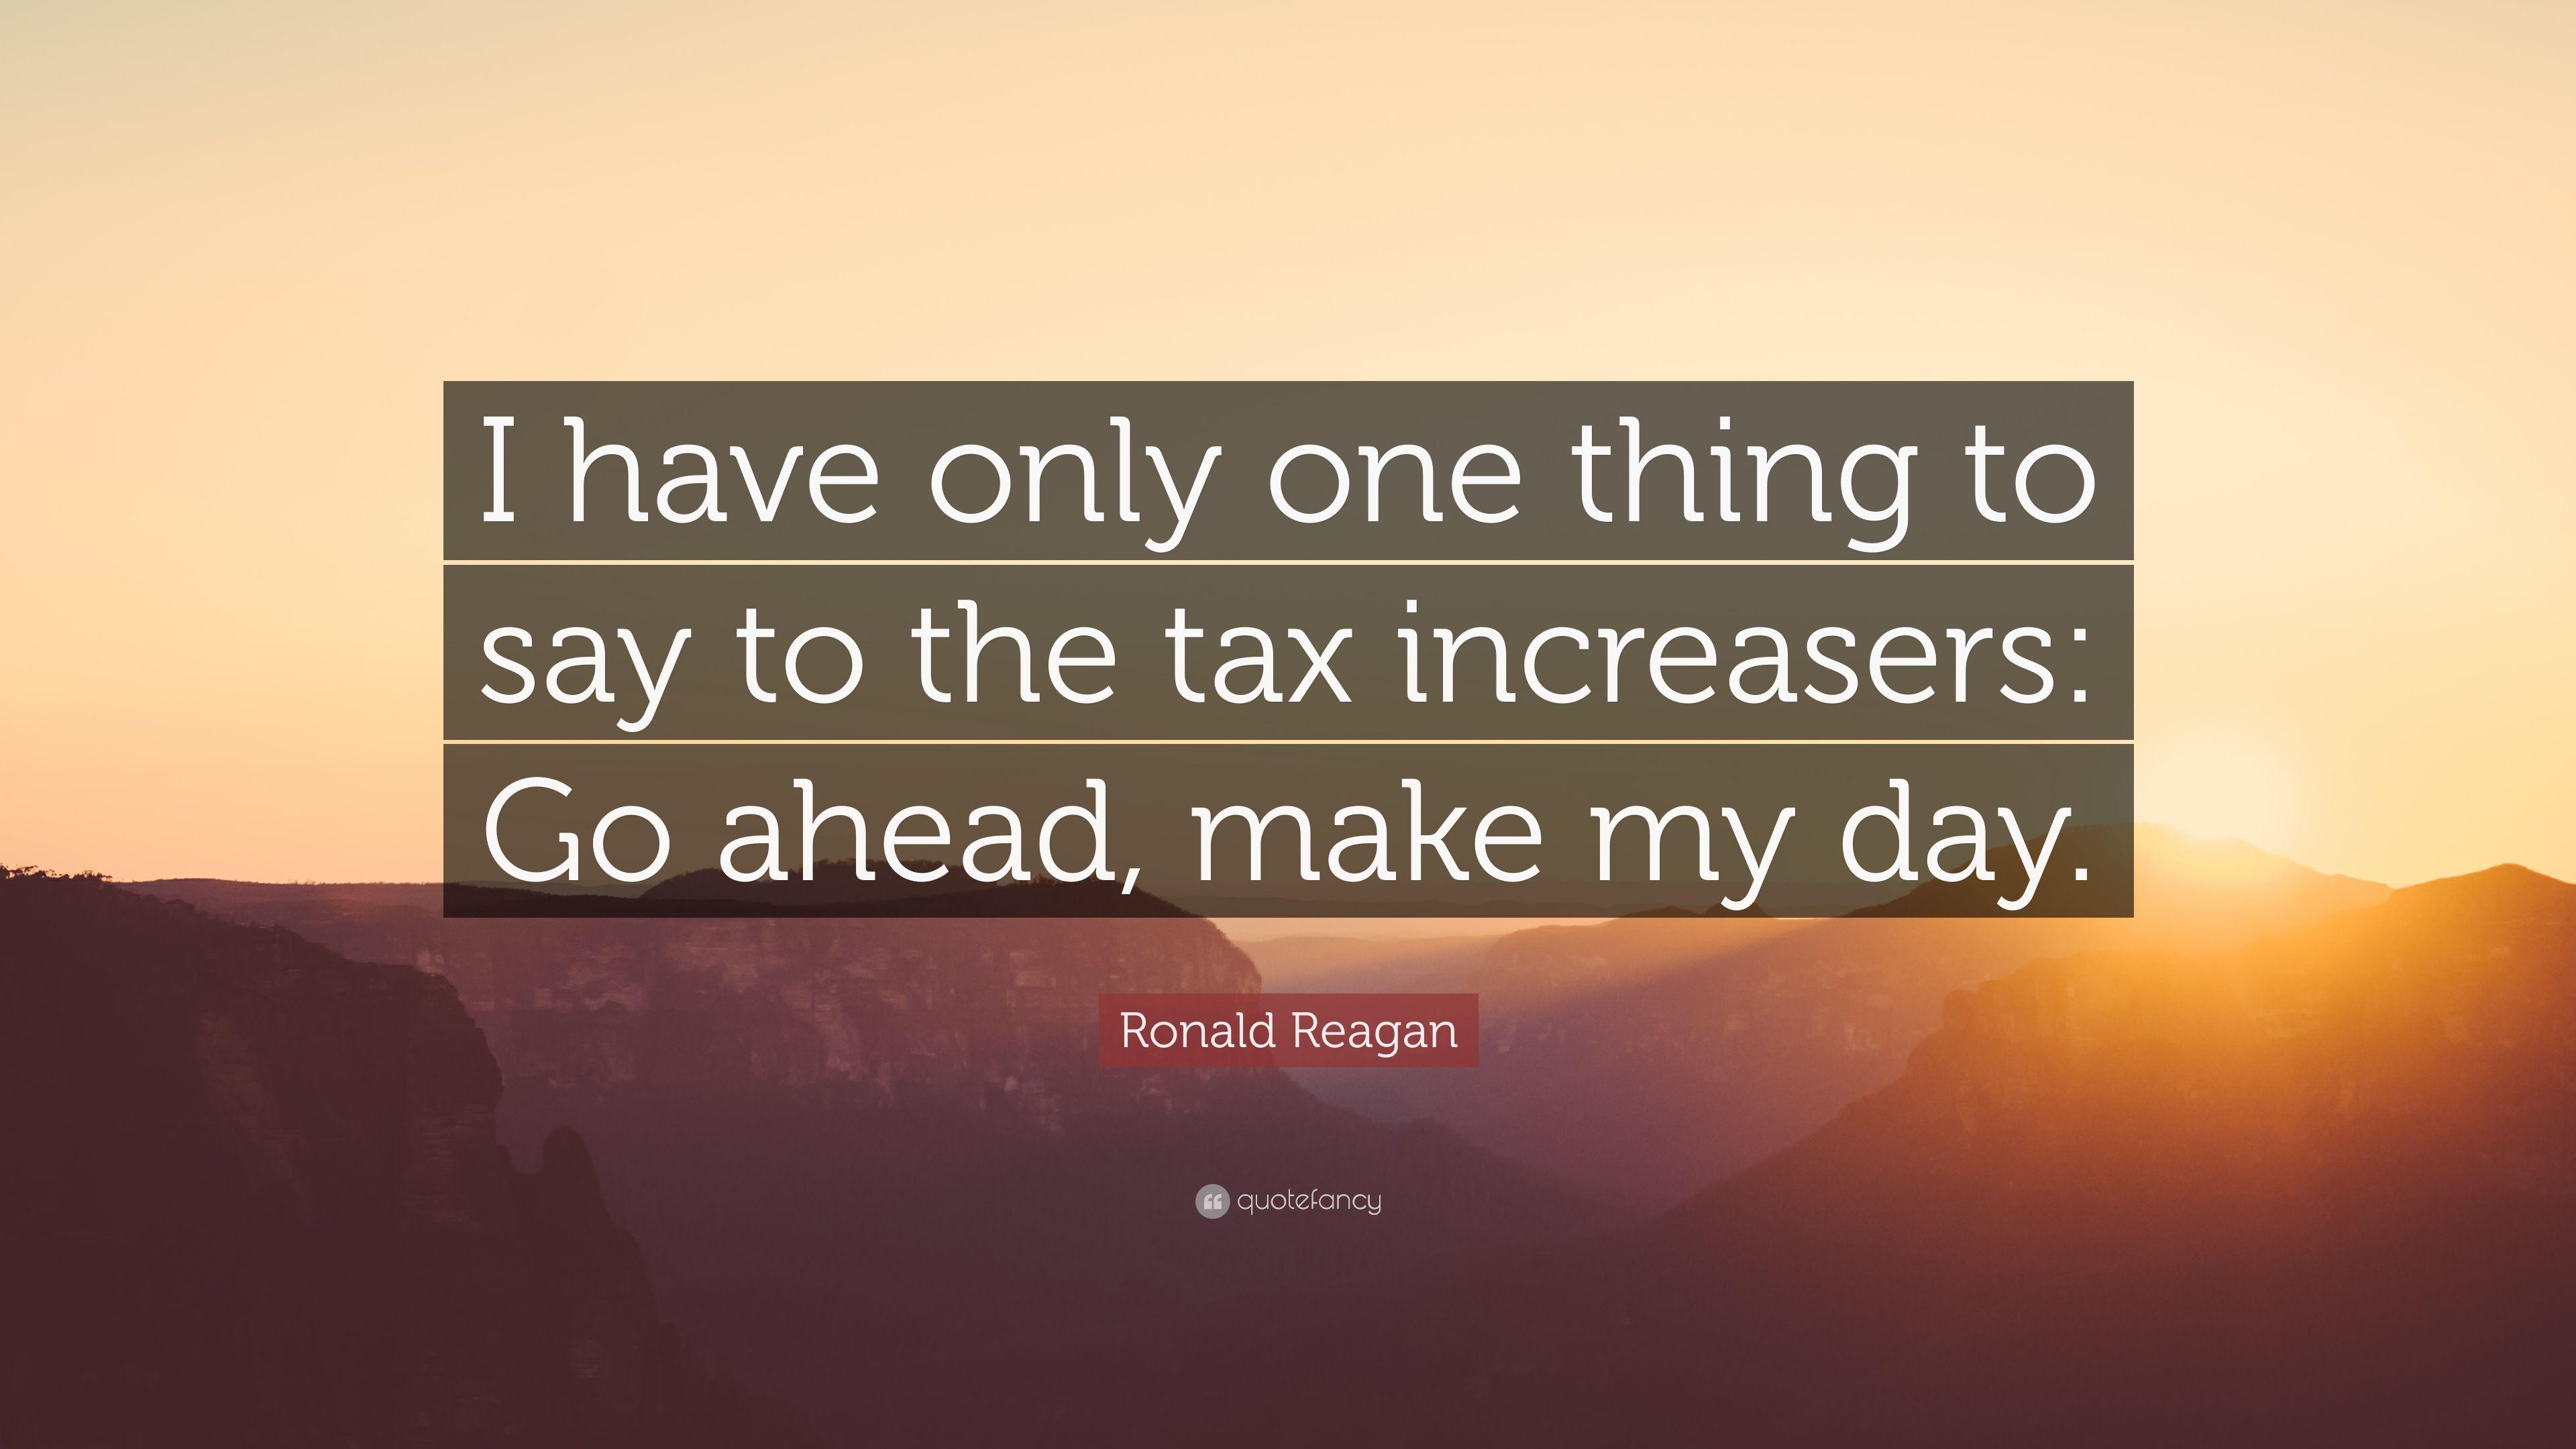 Ronald Reagan Quote: “I have only one thing to say to the tax